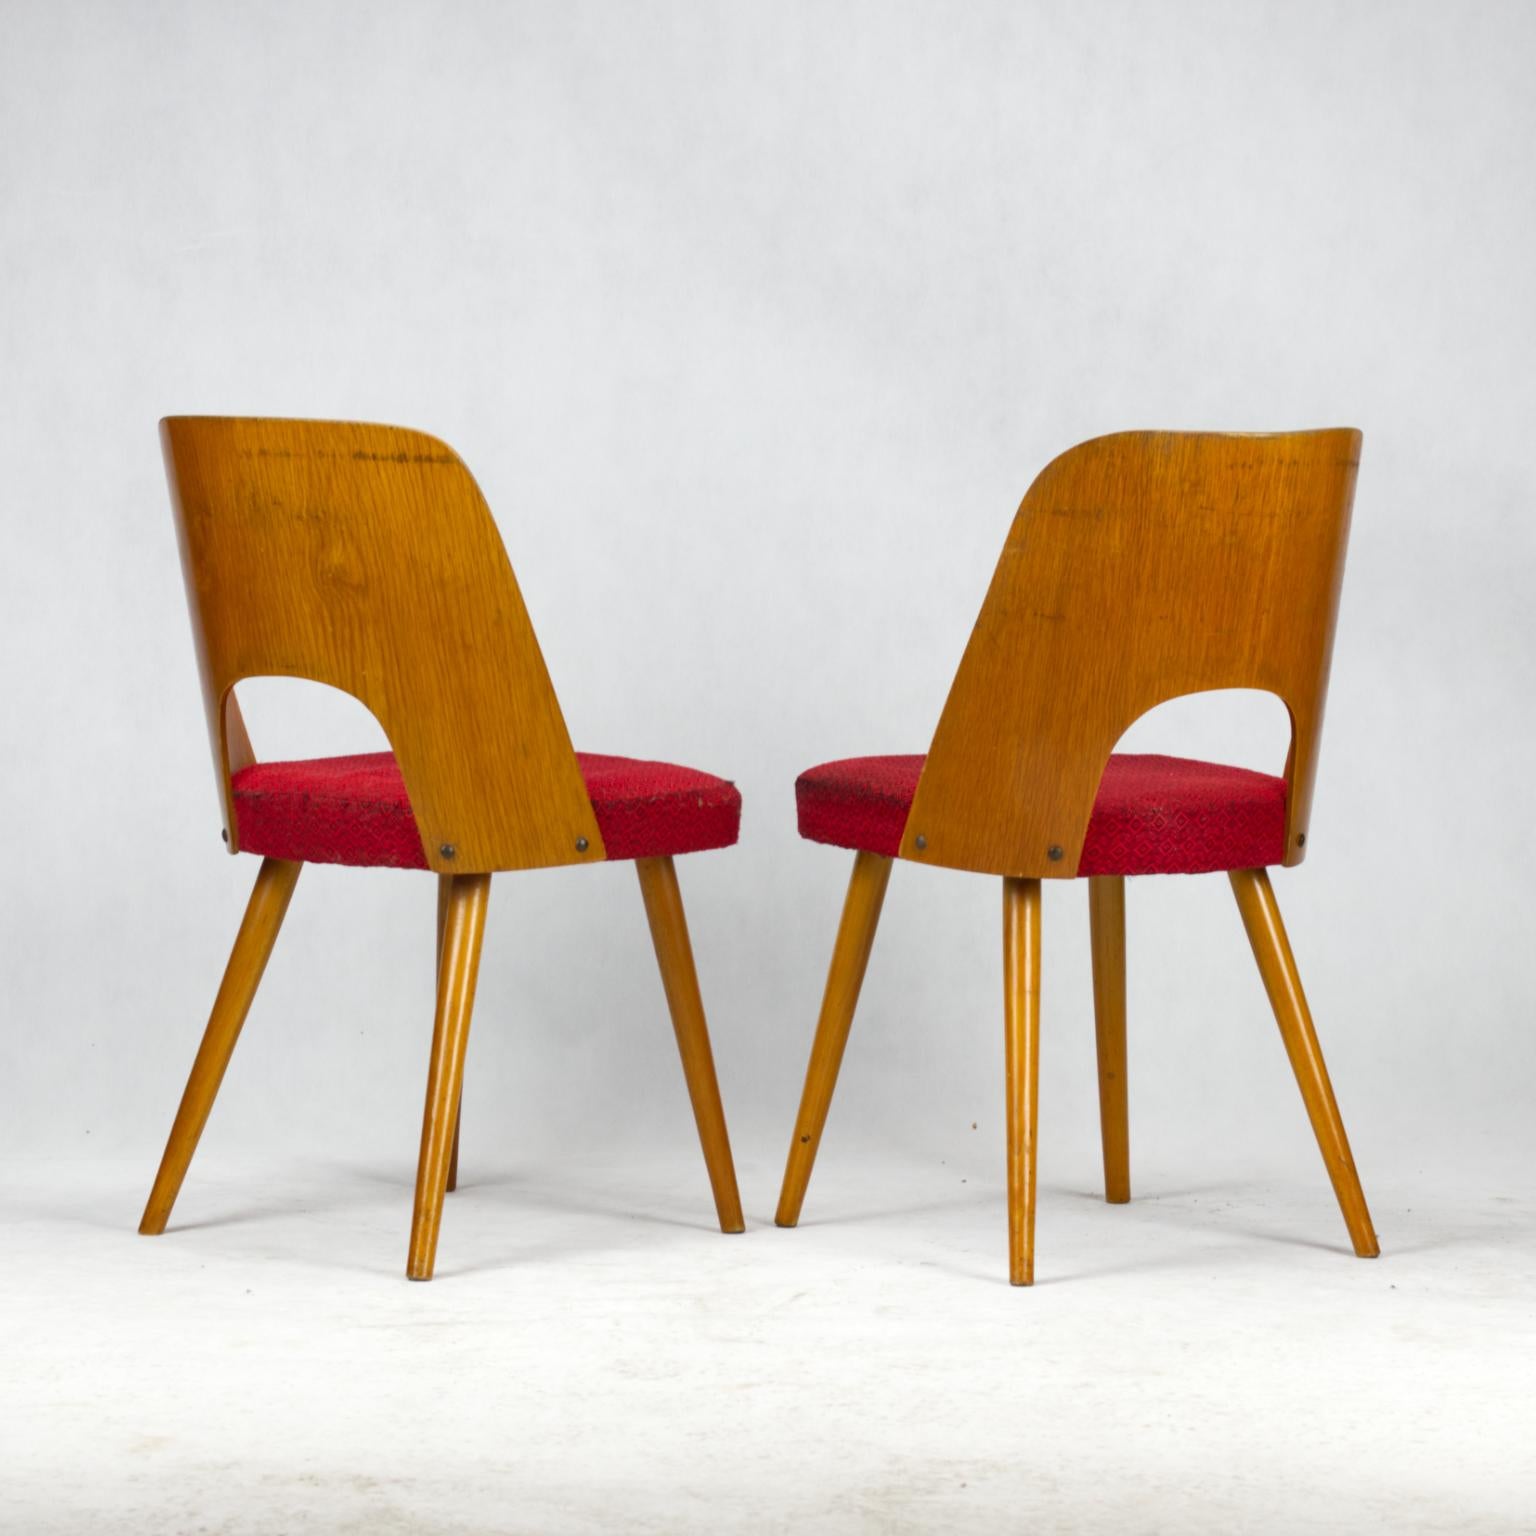 Czech Pair of Mid Century Dining Chairs by Oswald Haerdtl for Ton, 1950s